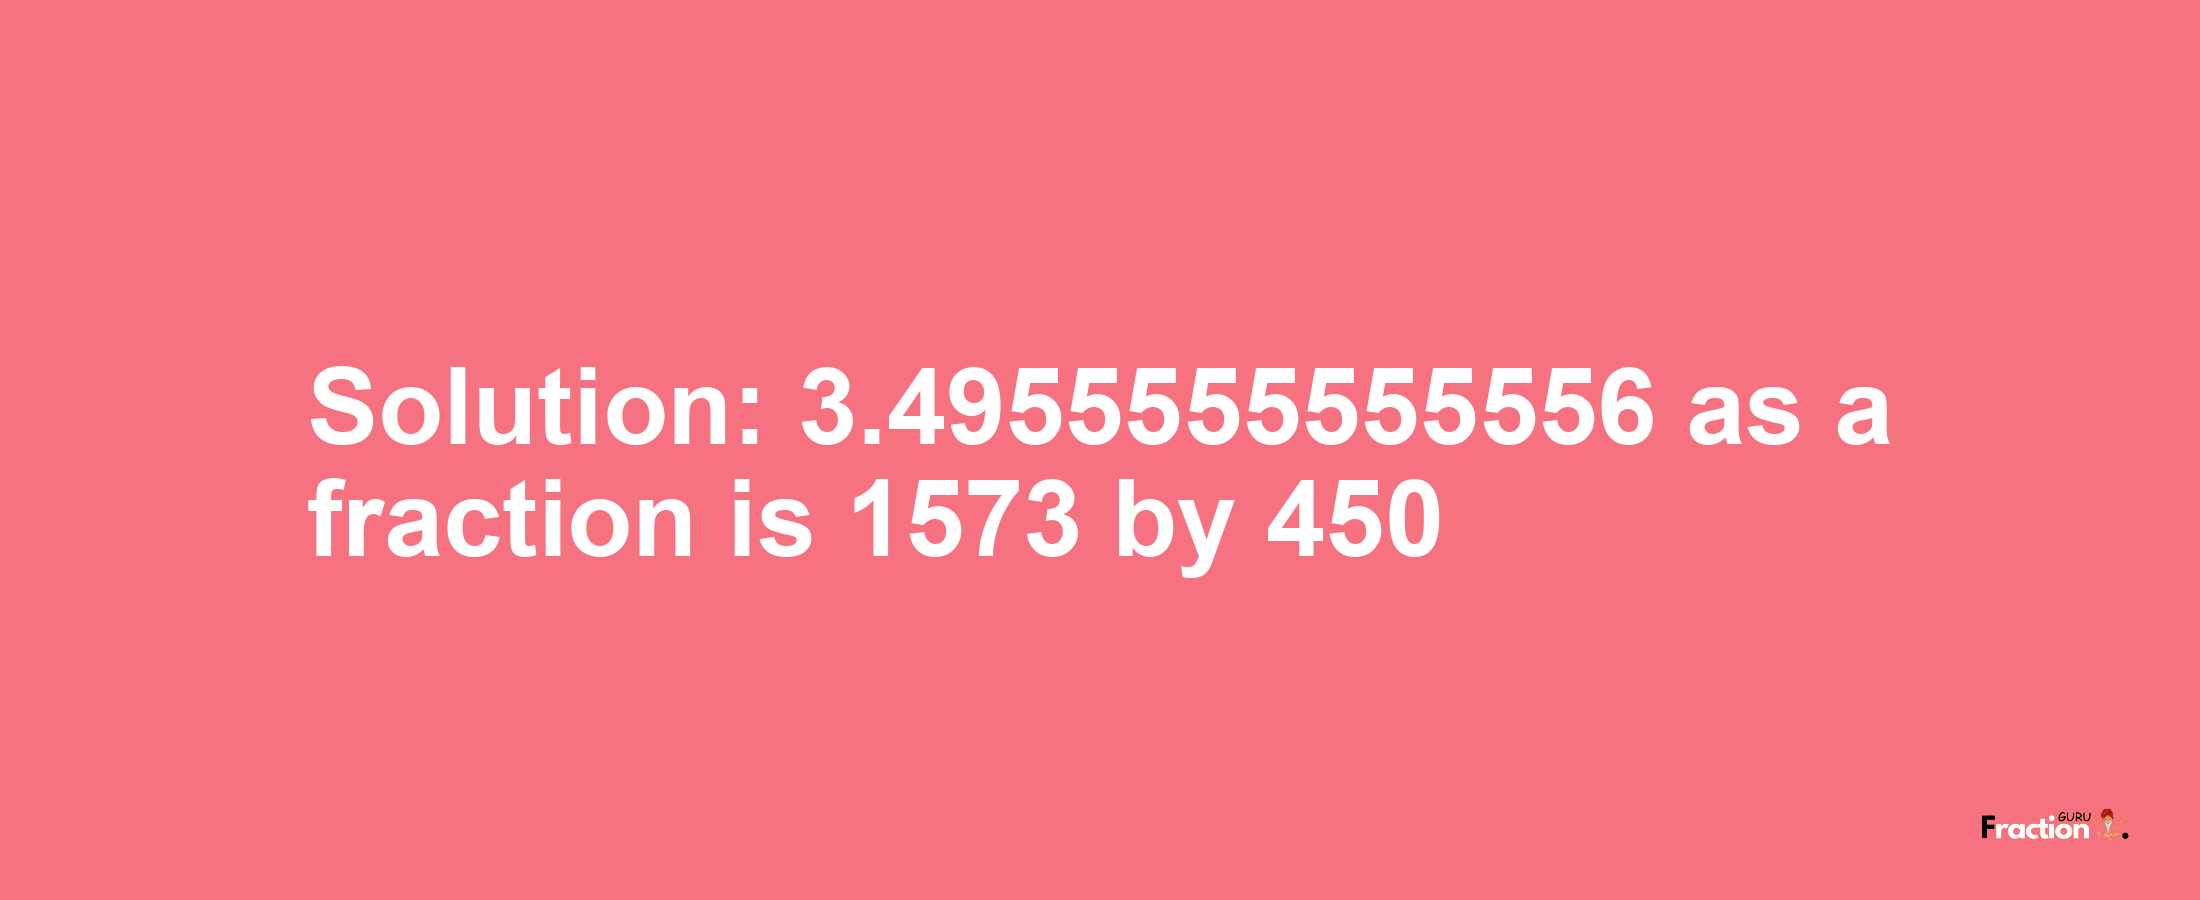 Solution:3.4955555555556 as a fraction is 1573/450